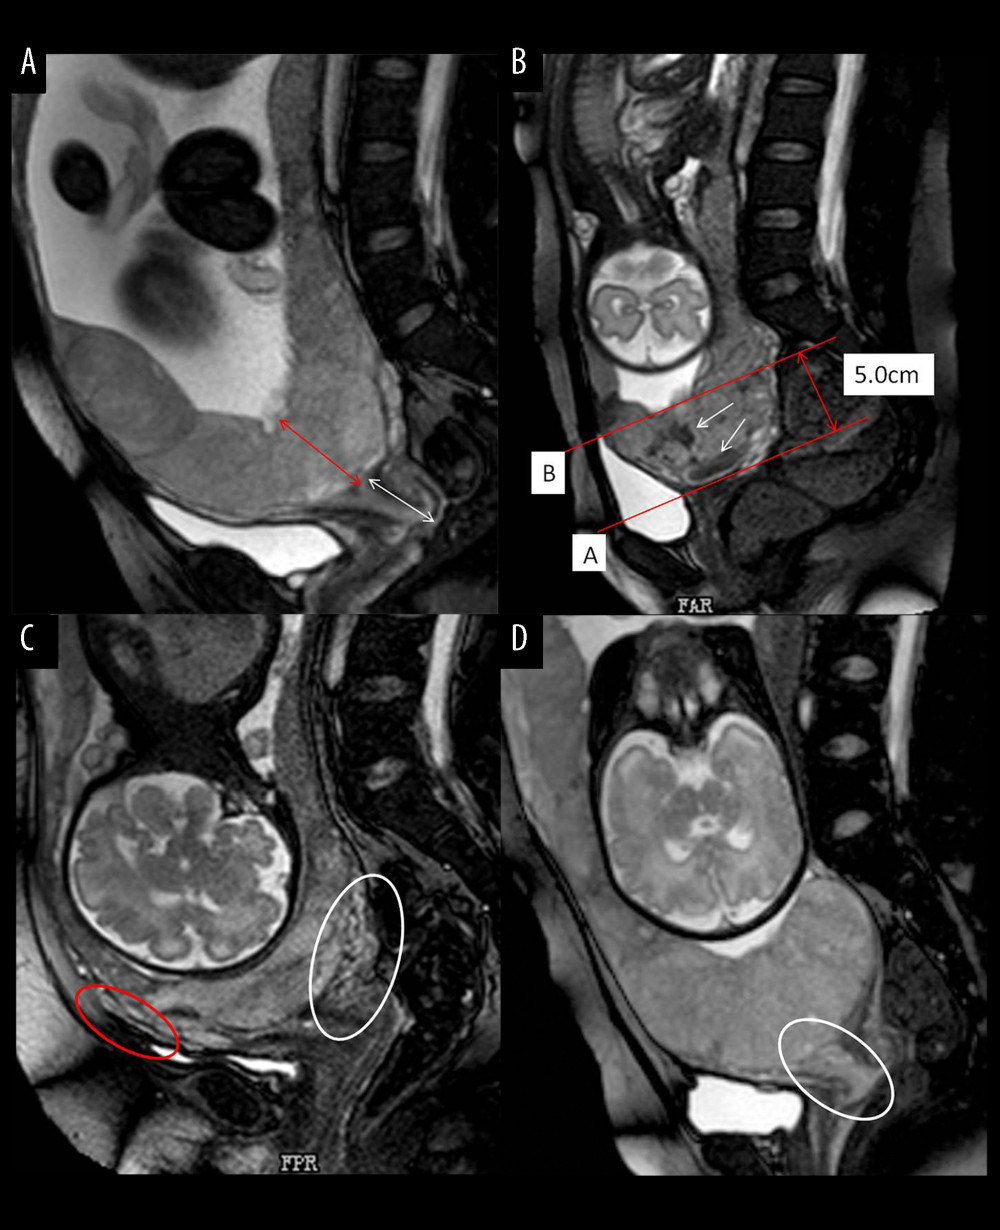 Different imaging characteristics of magnetic resonance imaging (MRI) in central placenta previa patients (Sagittal T2-weighted). (Microsoft office PowerPoint 2007, Microsoft, USA). (A) Placenta thickness: Placental thickness was measured from the internal cervix (red arrow); Cervical length: White arrow indicate the measurement of cervical length. (B) Placental dark T2 bands: The tangent line at the internal cervix (line A), parallel line 5 cm from line A (line B), the dark band (white arrow) between line A and line B is the area that we studied. (C). Cervical marginal sinus: Assessment of cervical marginal sinus signs using MRI (white circle); Myometrial thinning: The myometrium was partially defective, and placental tissue signals were seen in myometrium (red circle). (D). Placental signals in the cervix: Signs consistent with placental tissue were seen in the cervix, which means that the placenta may be inserted into the cervix (white circle); Lower uterine segment bulge: The placenta located entirely in the lower uterine segment, the lower uterine segment was enlarged and dilated.